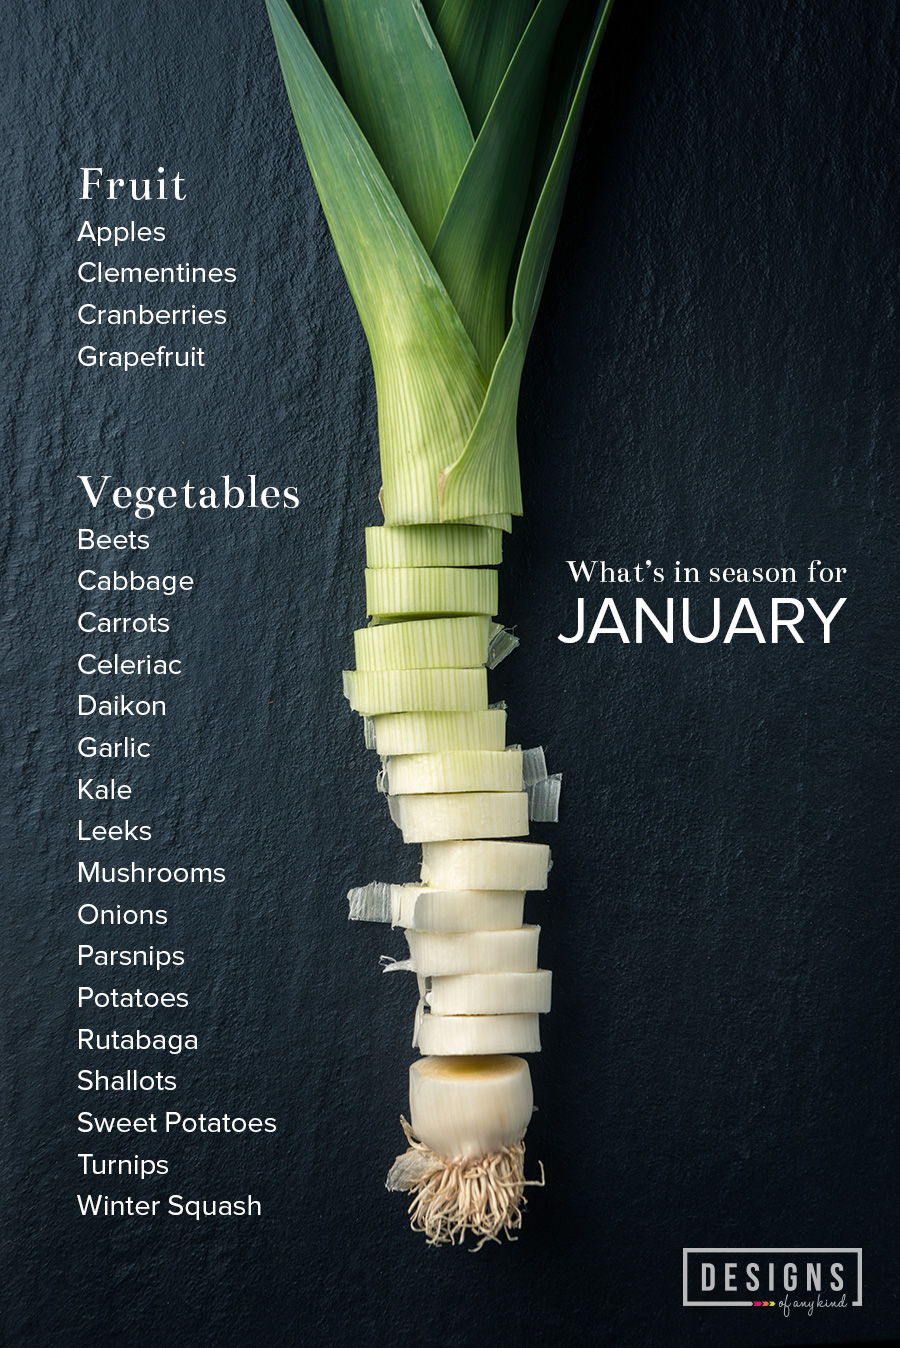 Eat the Seasons | January. Even in the dead of winter, we love eating what's fresh and in season. A round up of delicious and healthy food blogger recipes that capitalize on whats in season for January.